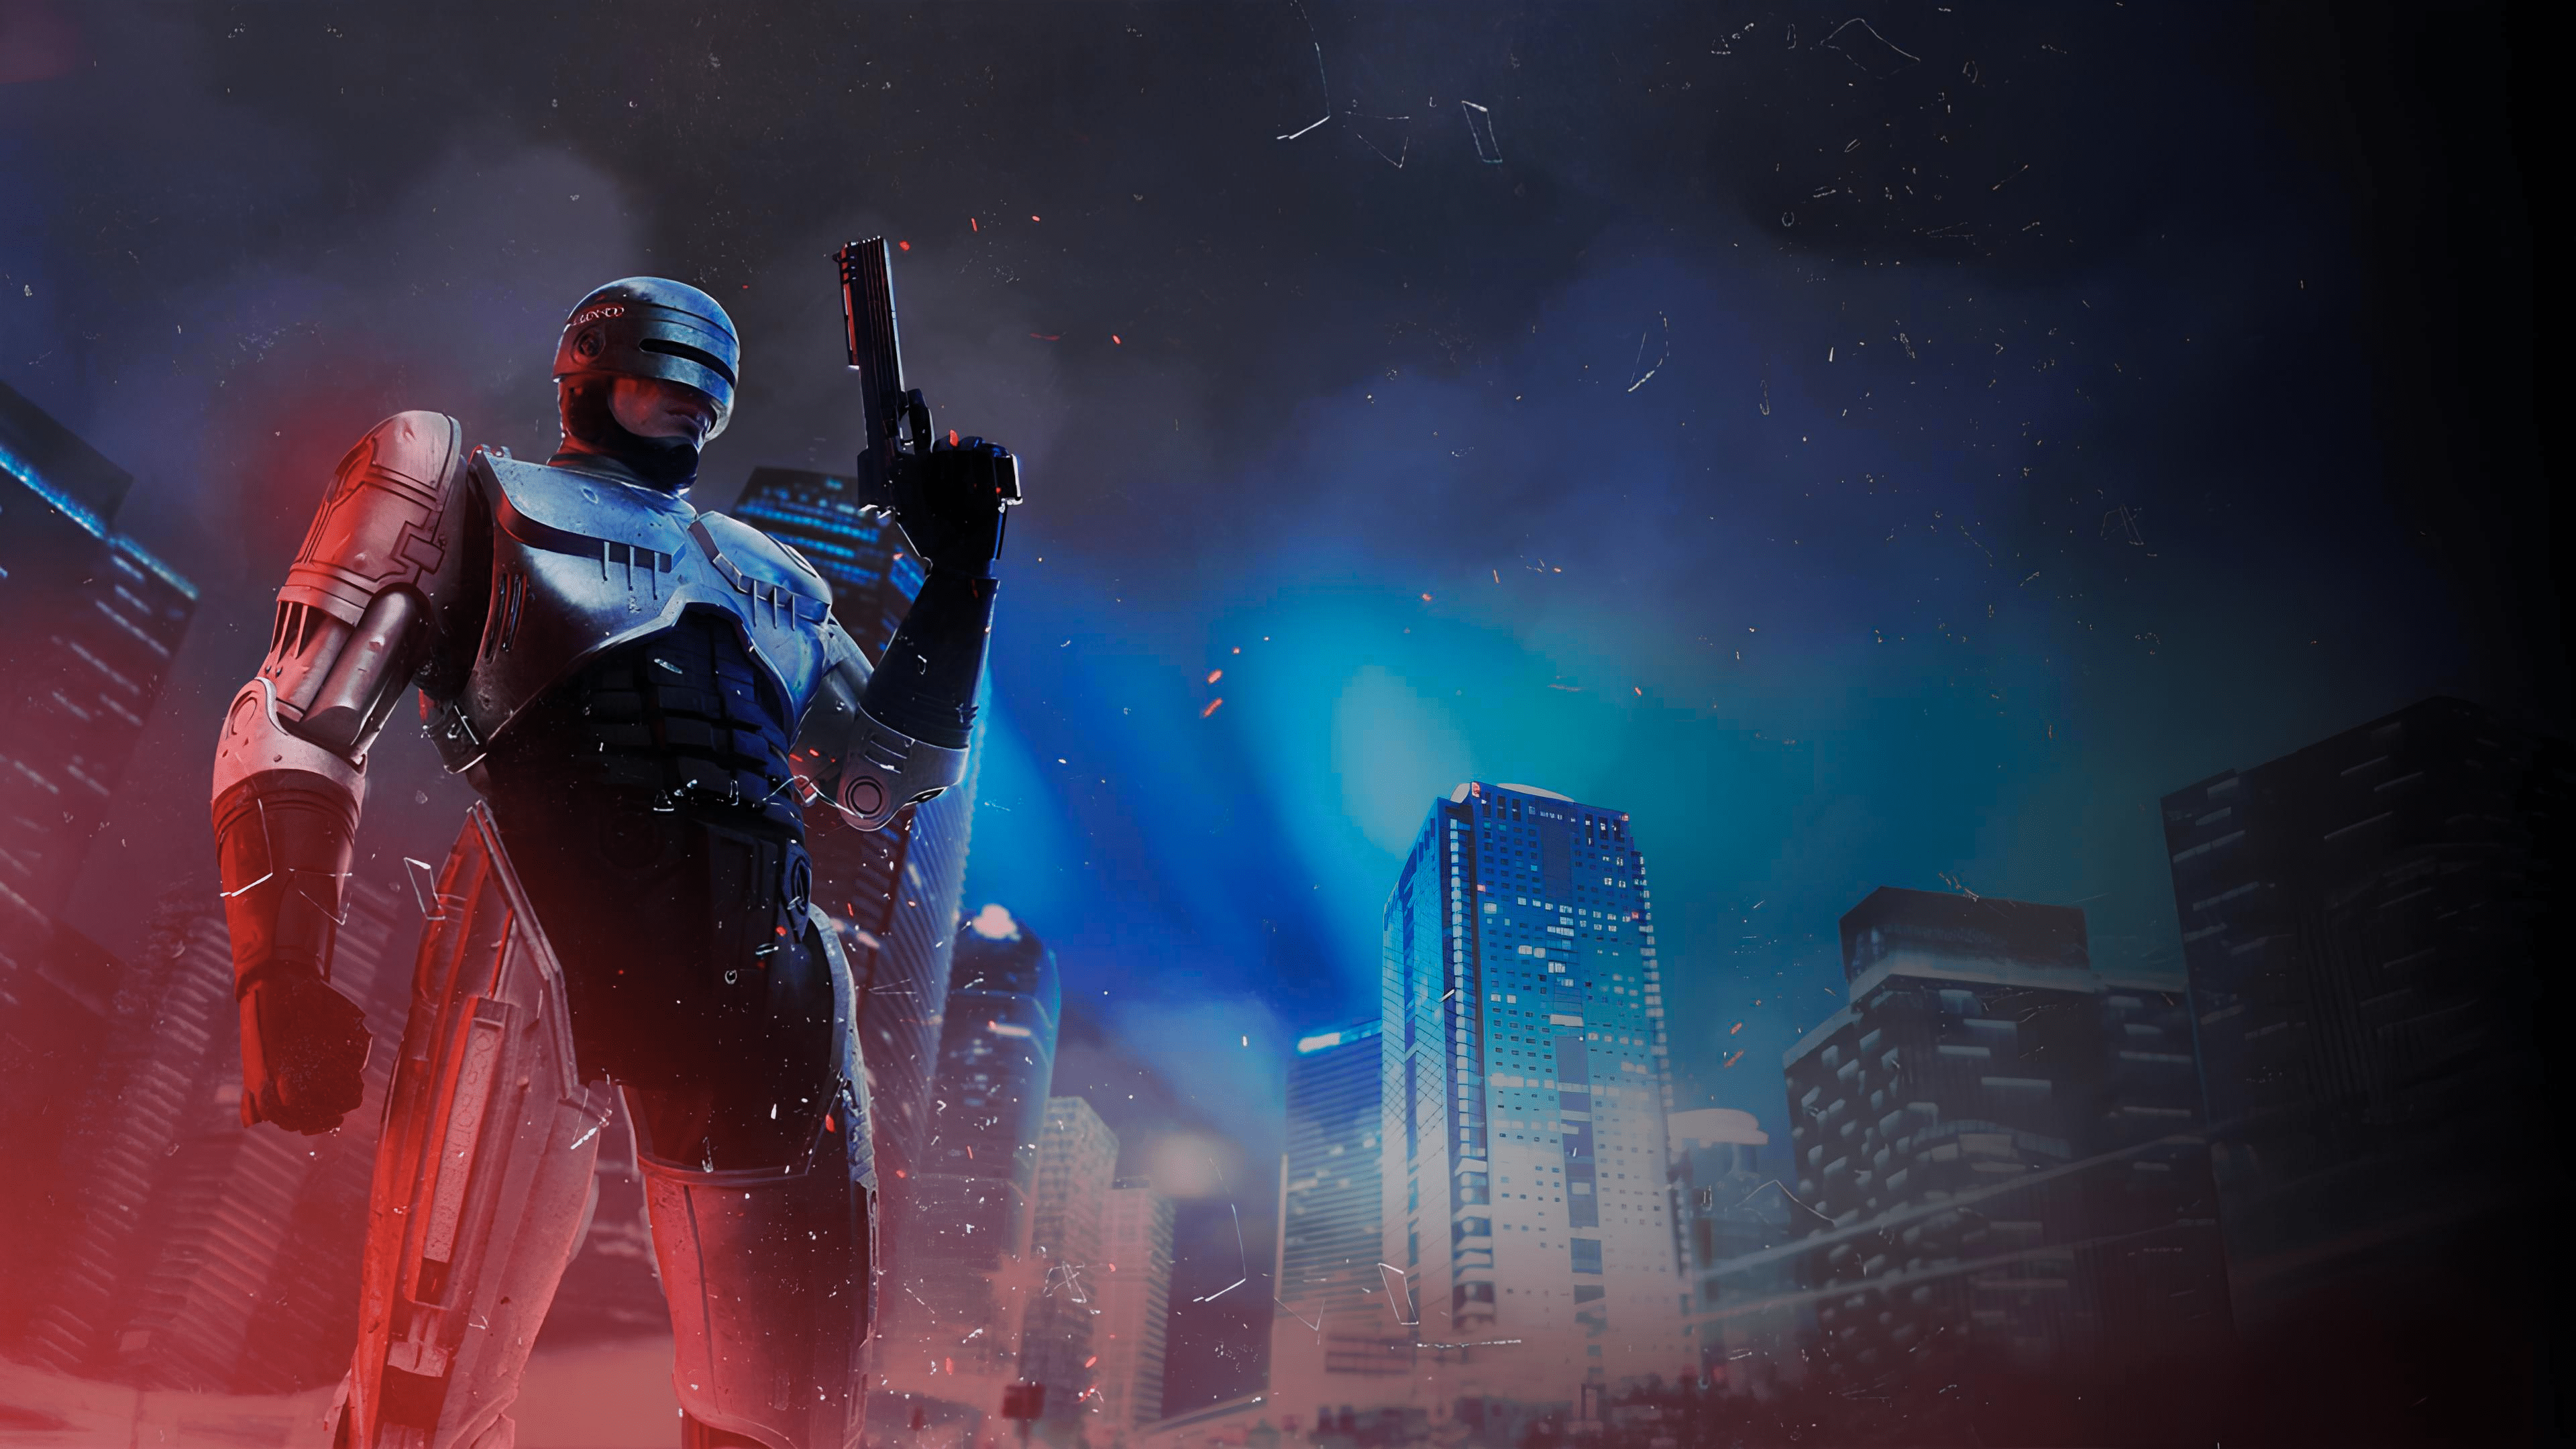 2880x1800 wallpaper of RoboCop standing in the city at night - Rogue